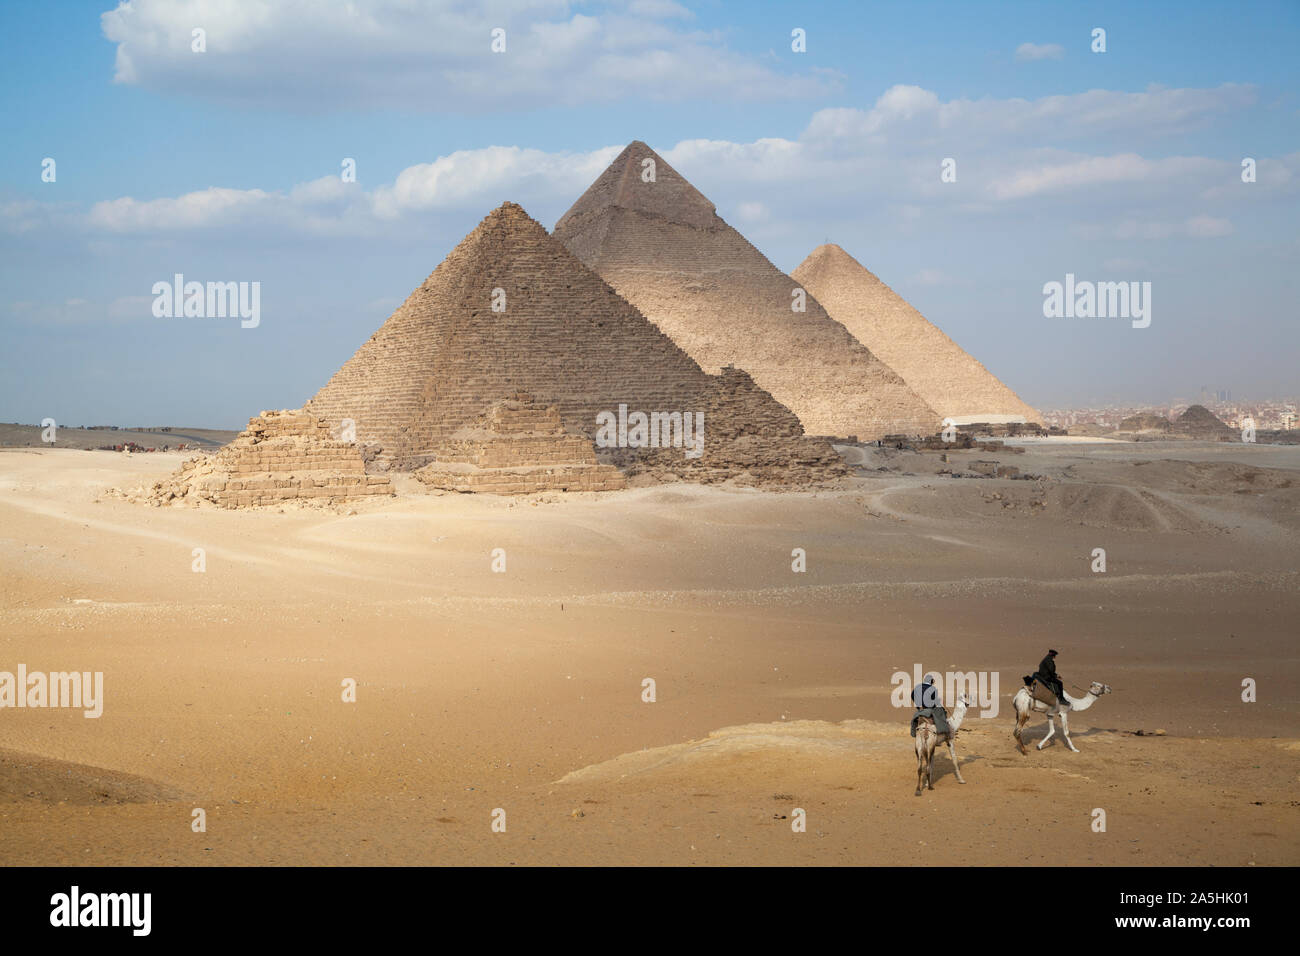 Egypt, Giza, the great Pyramids at Giza with men on camels. Stock Photo